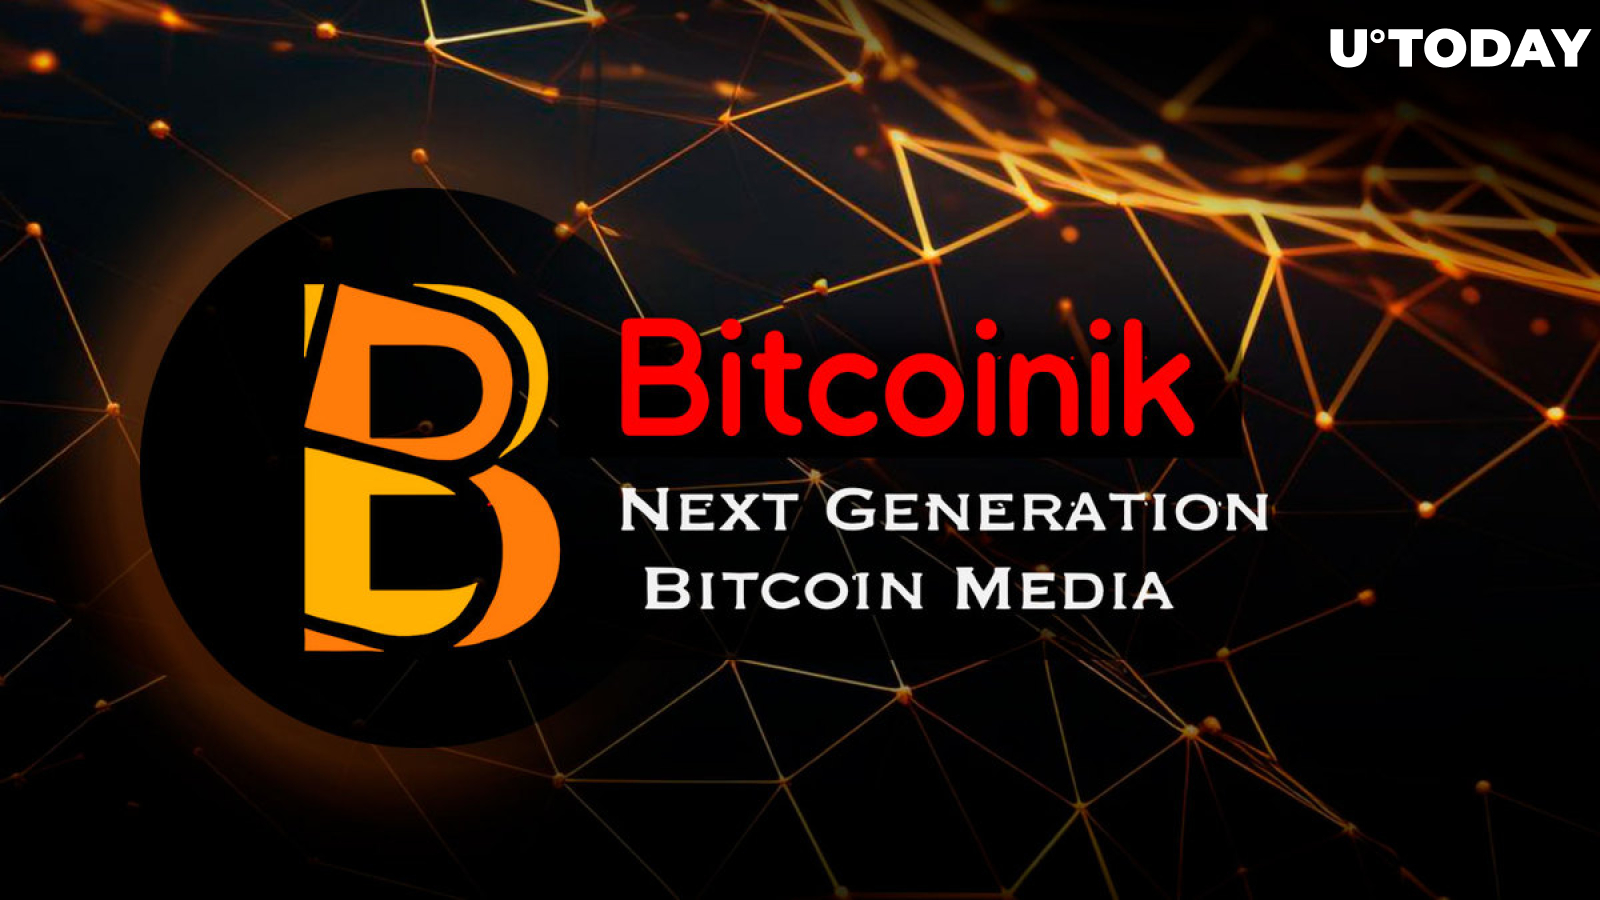 Bitcoinik Provides Crypto Insights for Newcomers and Pros